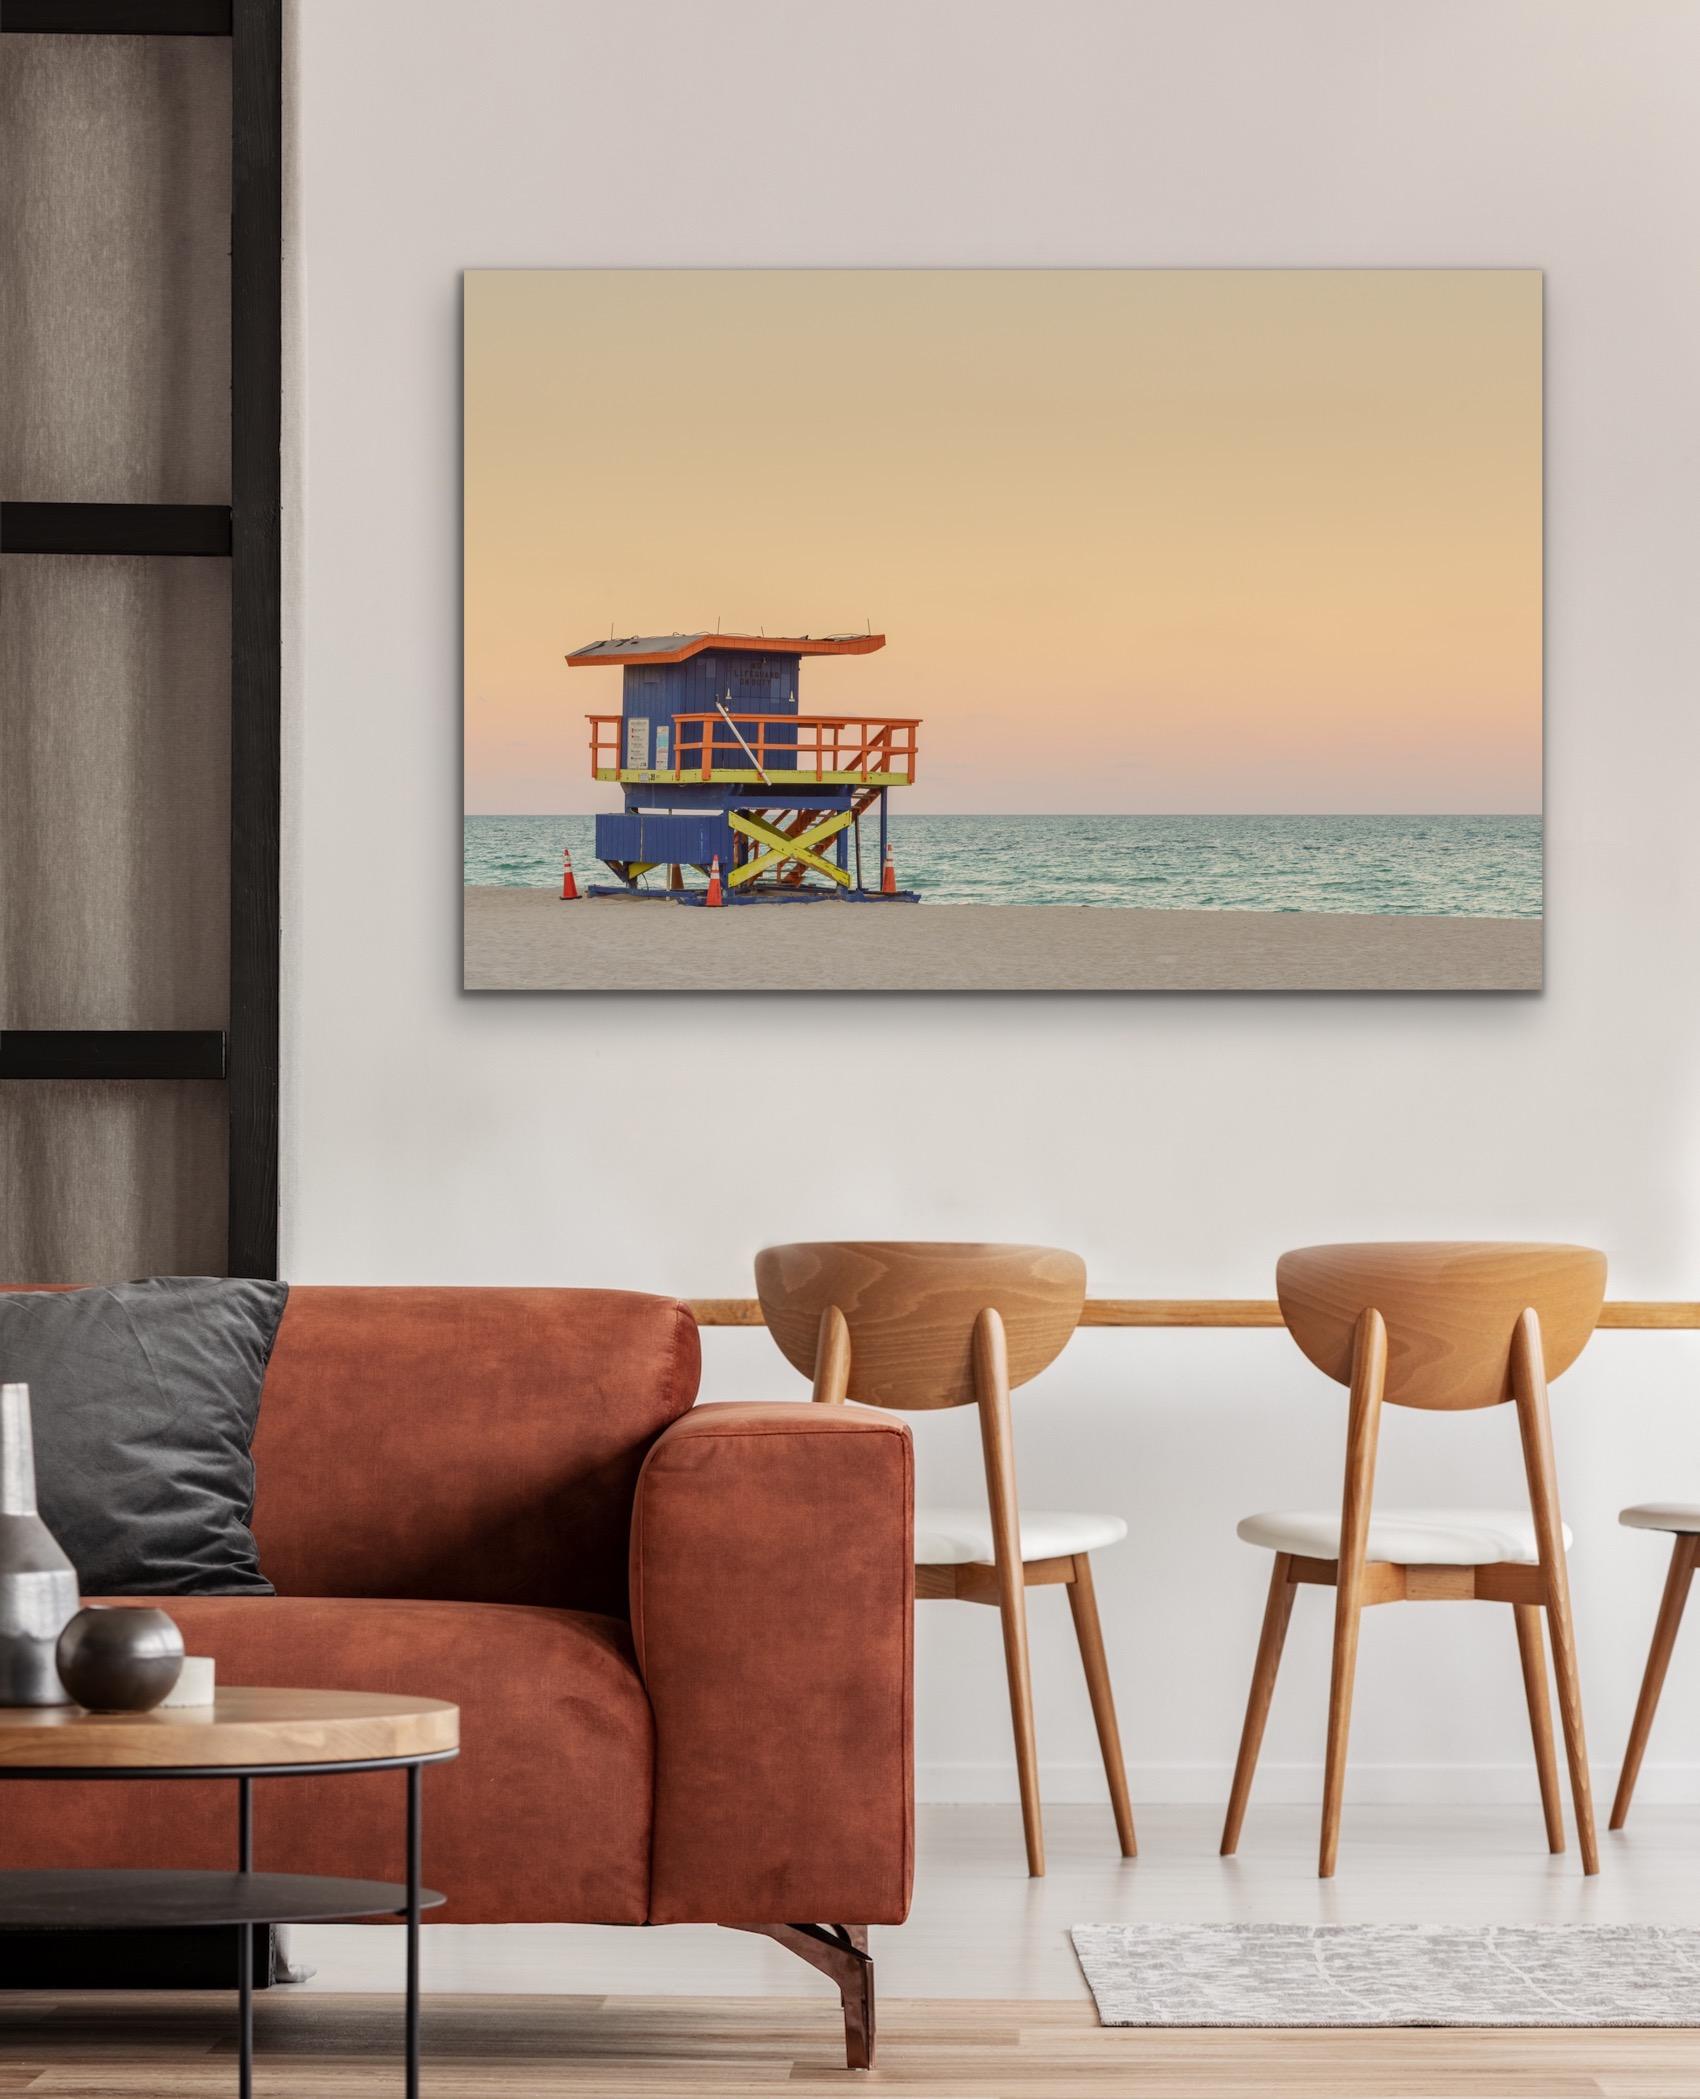 This contemporary coastal photograph by Peter Mendelson features a blue, orange, and yellow painted lifeguard stand in Miami, looking out over a muted teal ocean and a pink and yellow sunset. It is part of a series of photographs taken of the famous